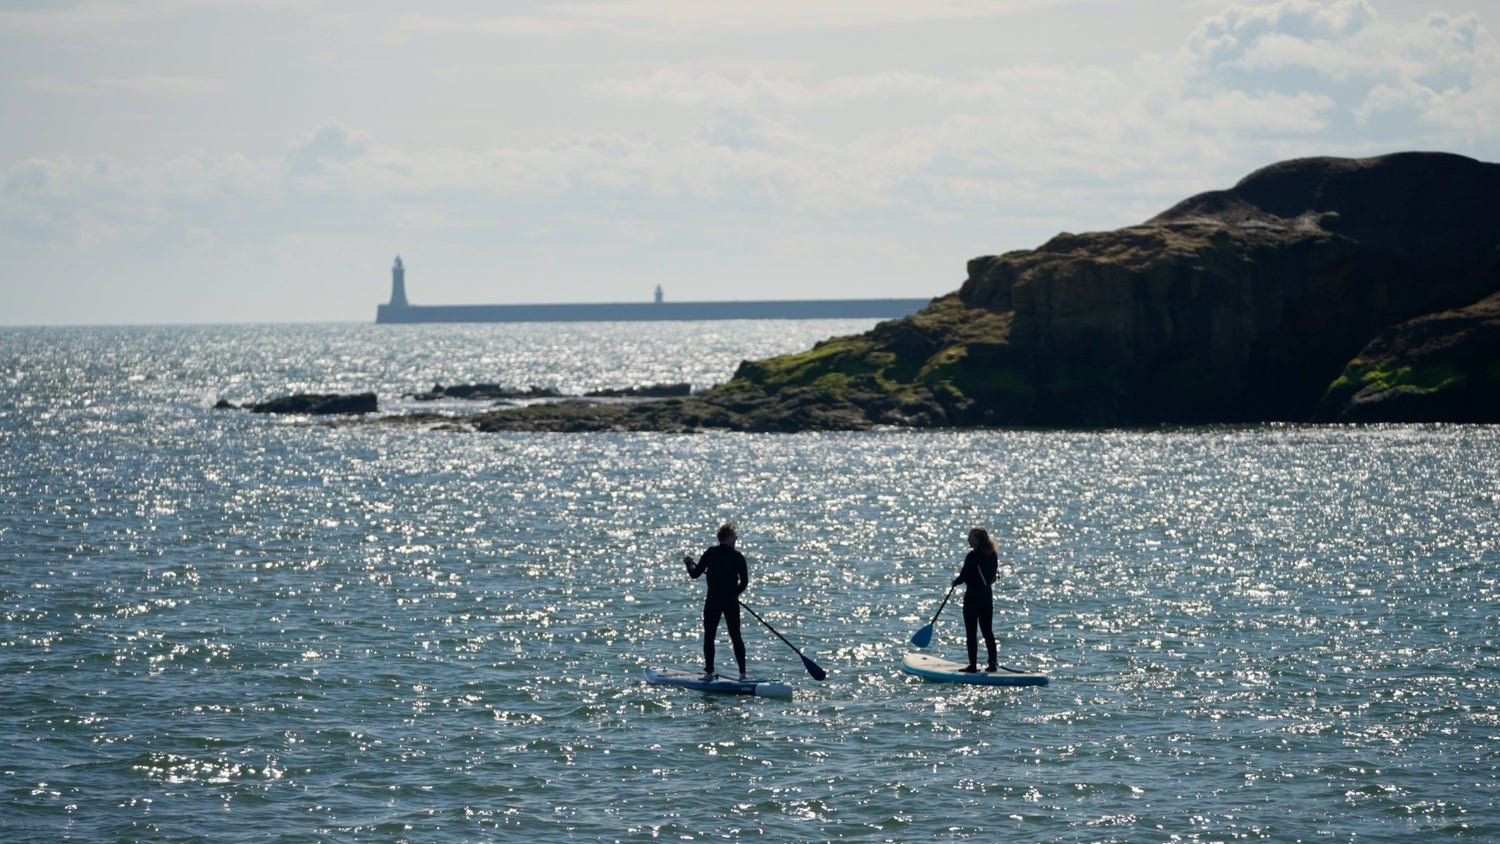 Spring SUP Safety: Essential Tips for Paddling in Changing Conditions - Wave Sups UK